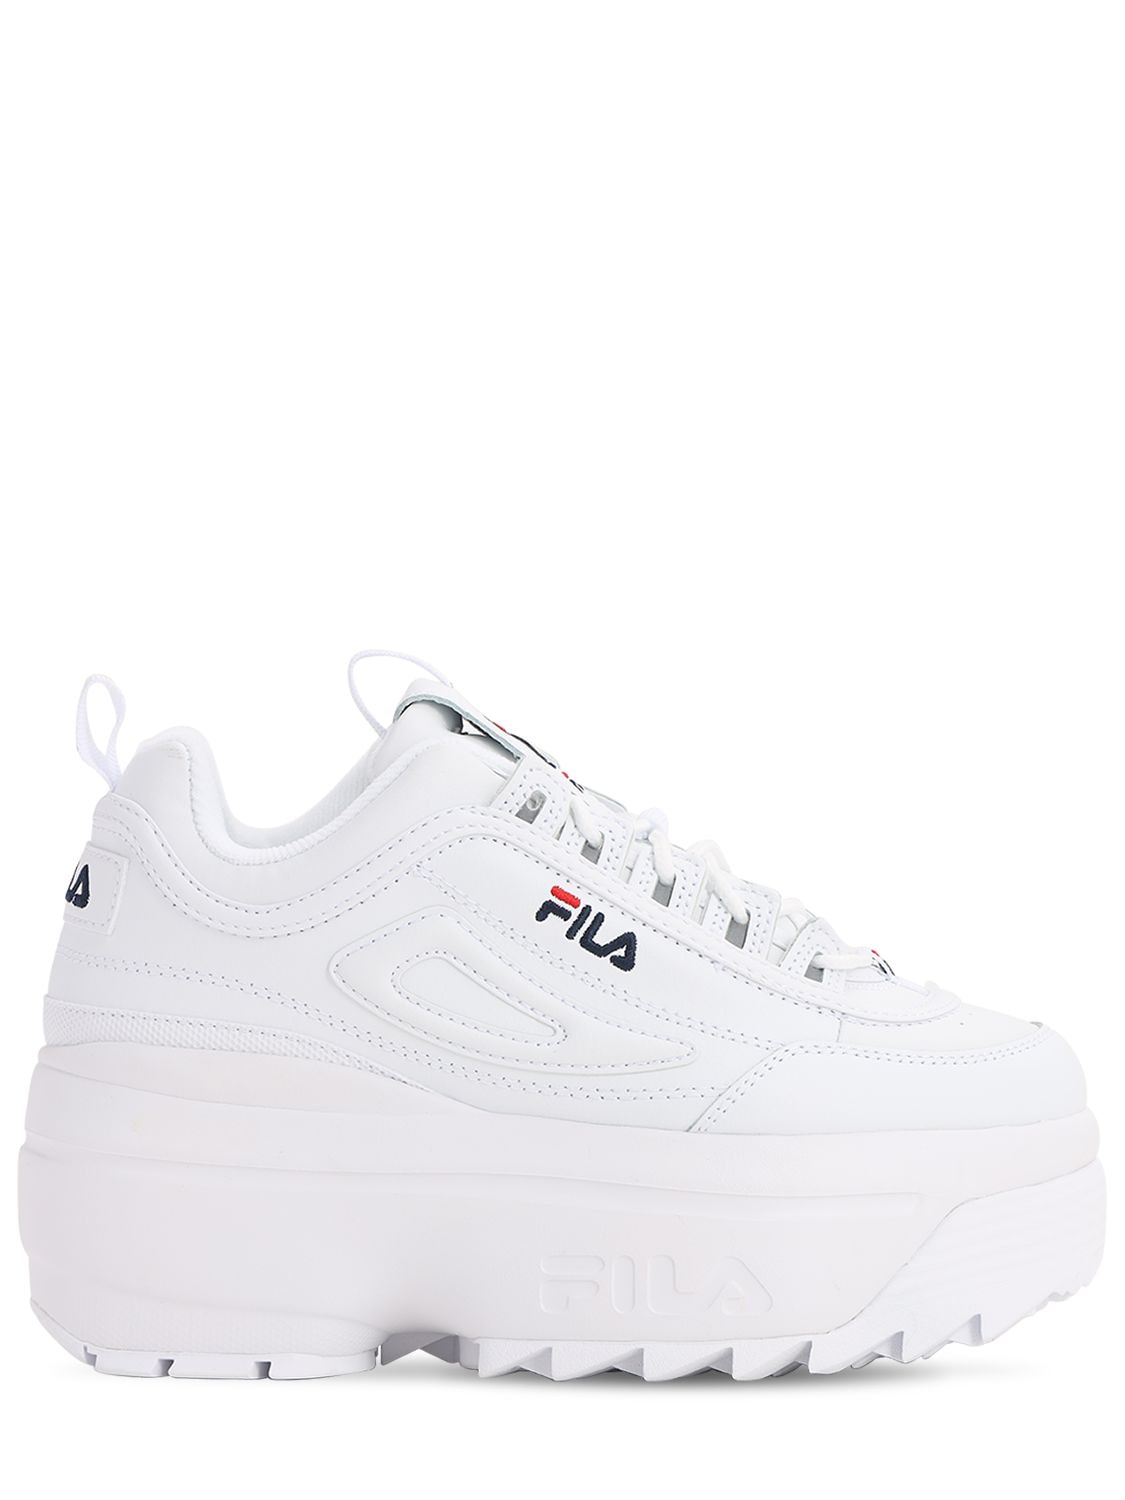 white faux leather platform sneakers